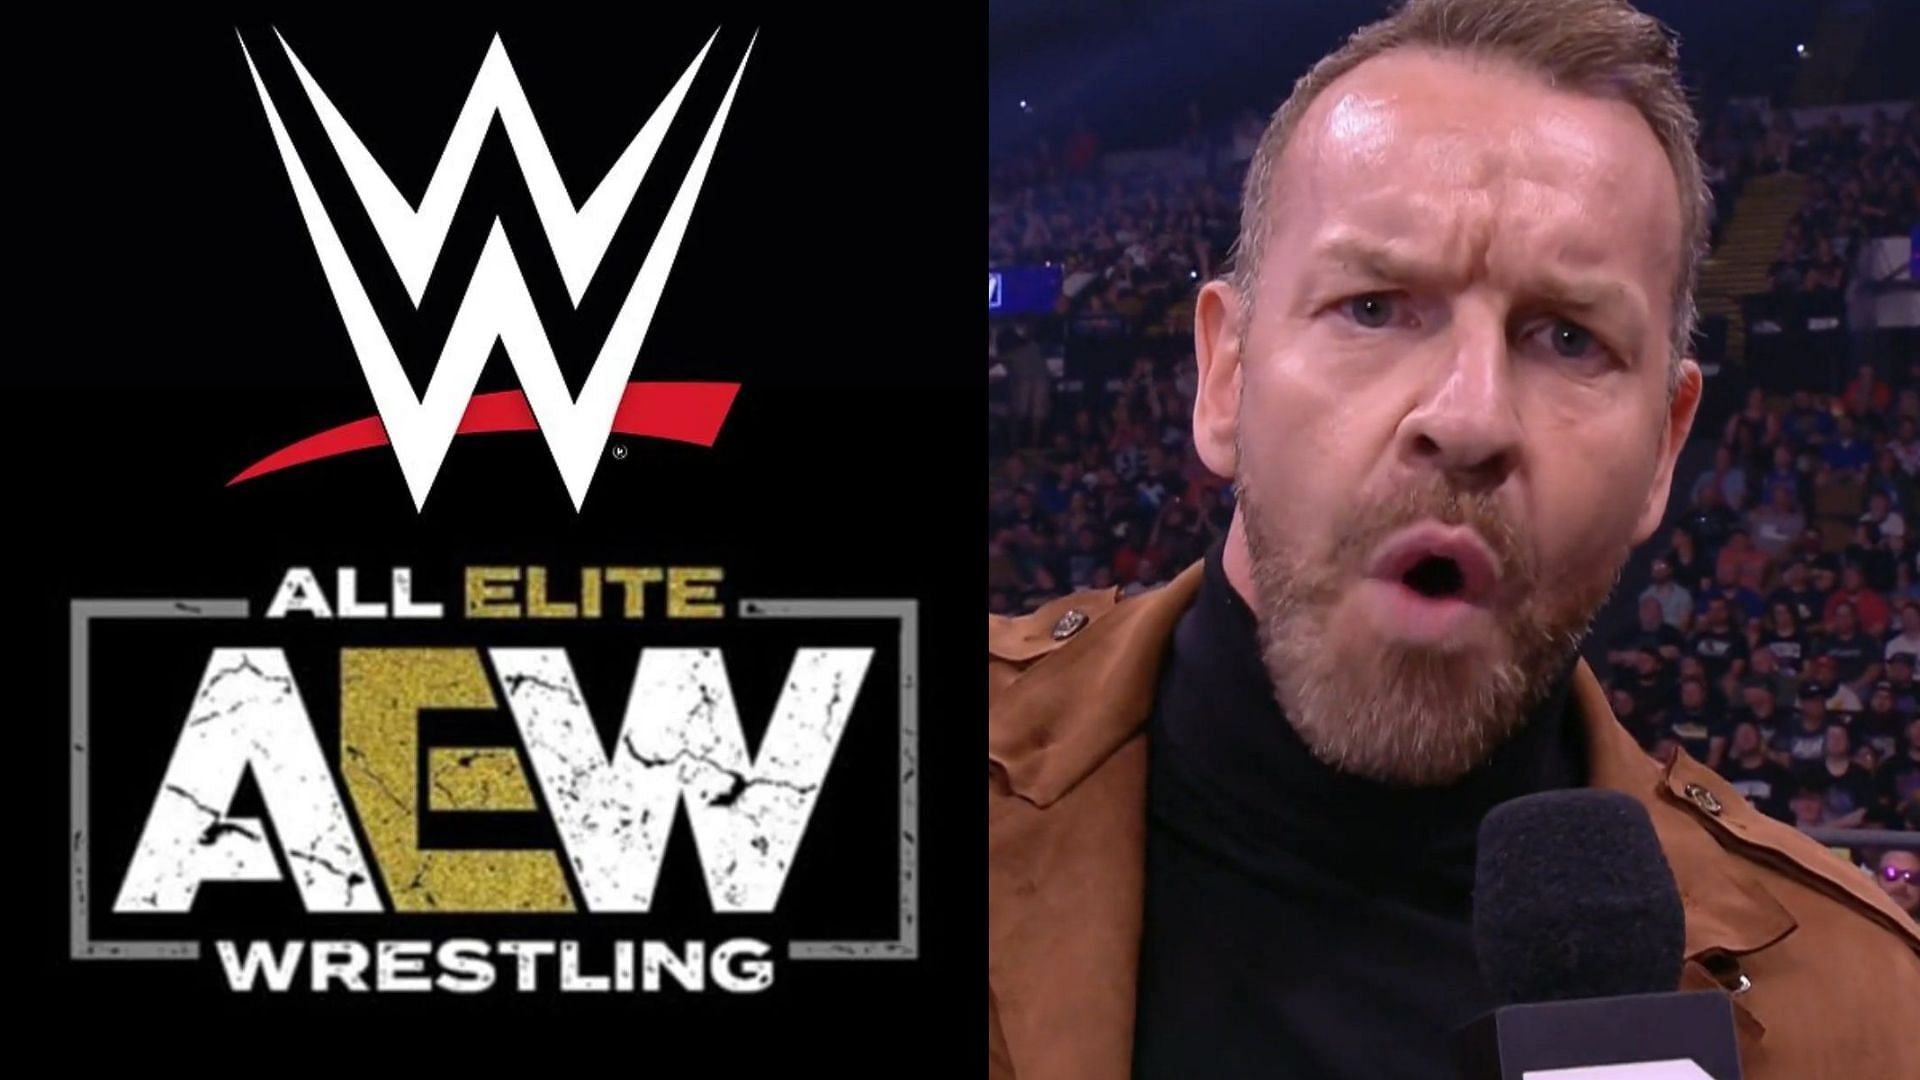 WWE and AEW logos (left); Christian Cage (right)